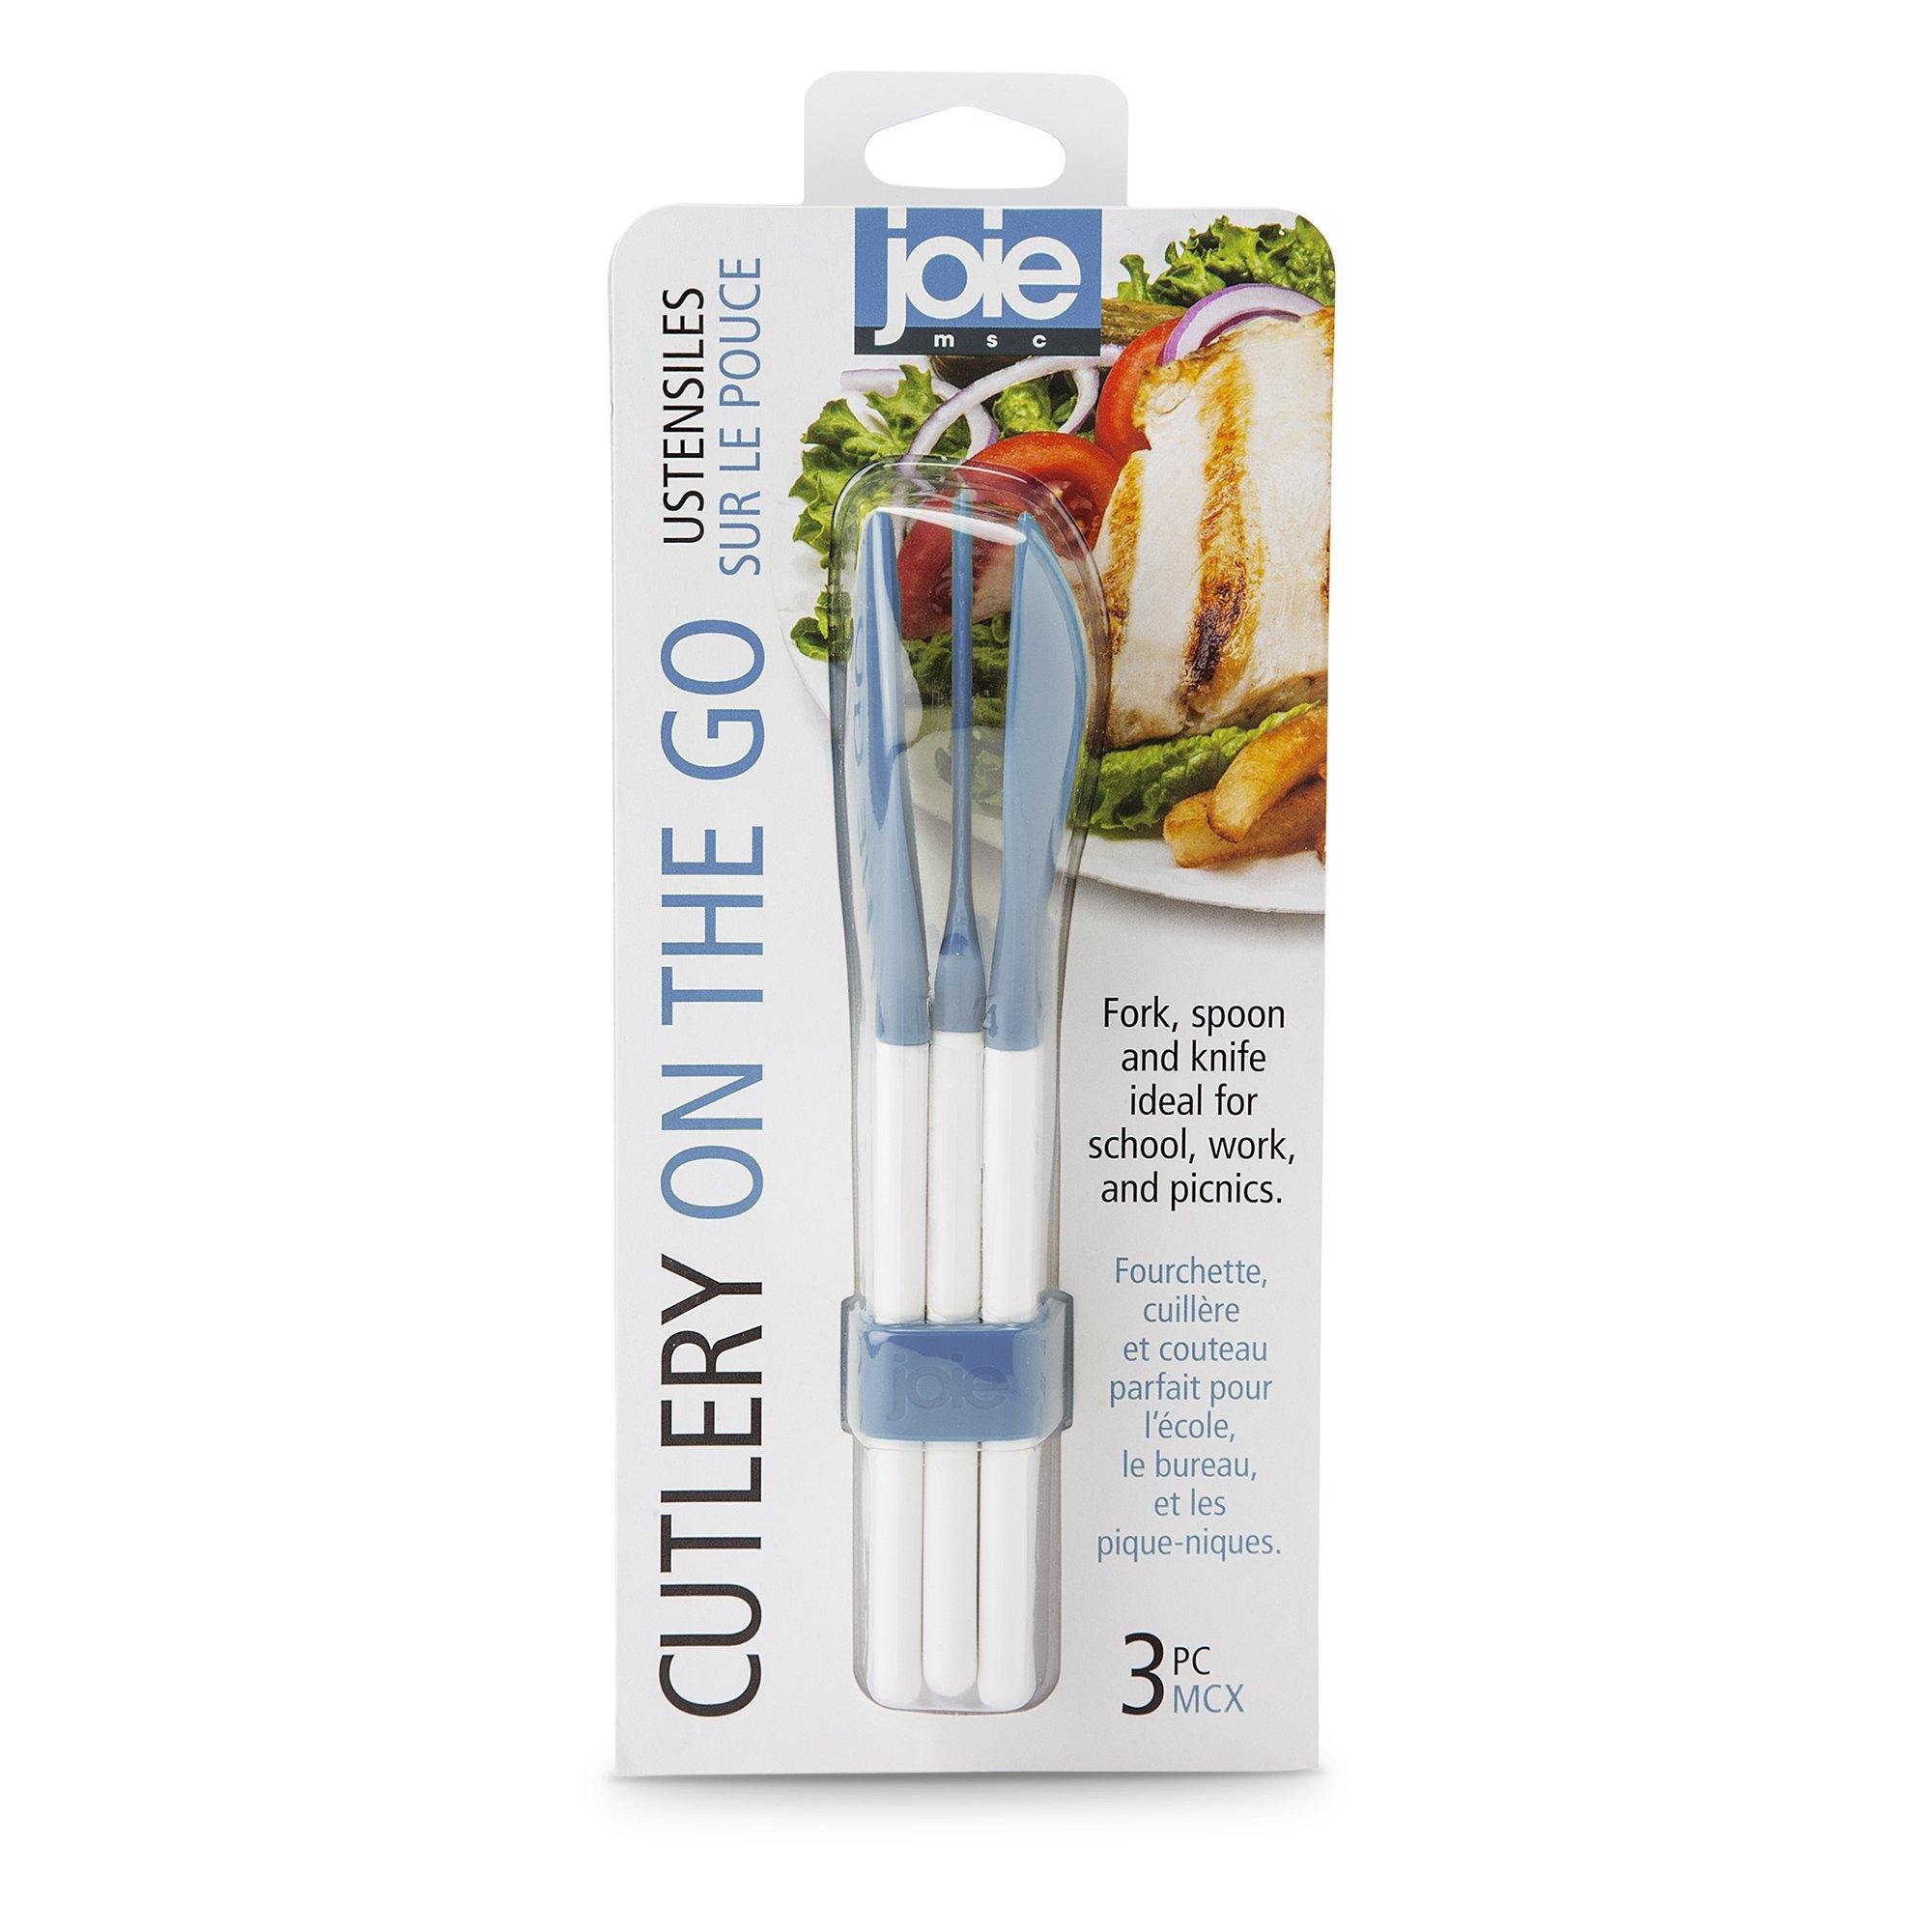 Joie MSC Cutlery On The Go 3Pc - Dollar Max Depot